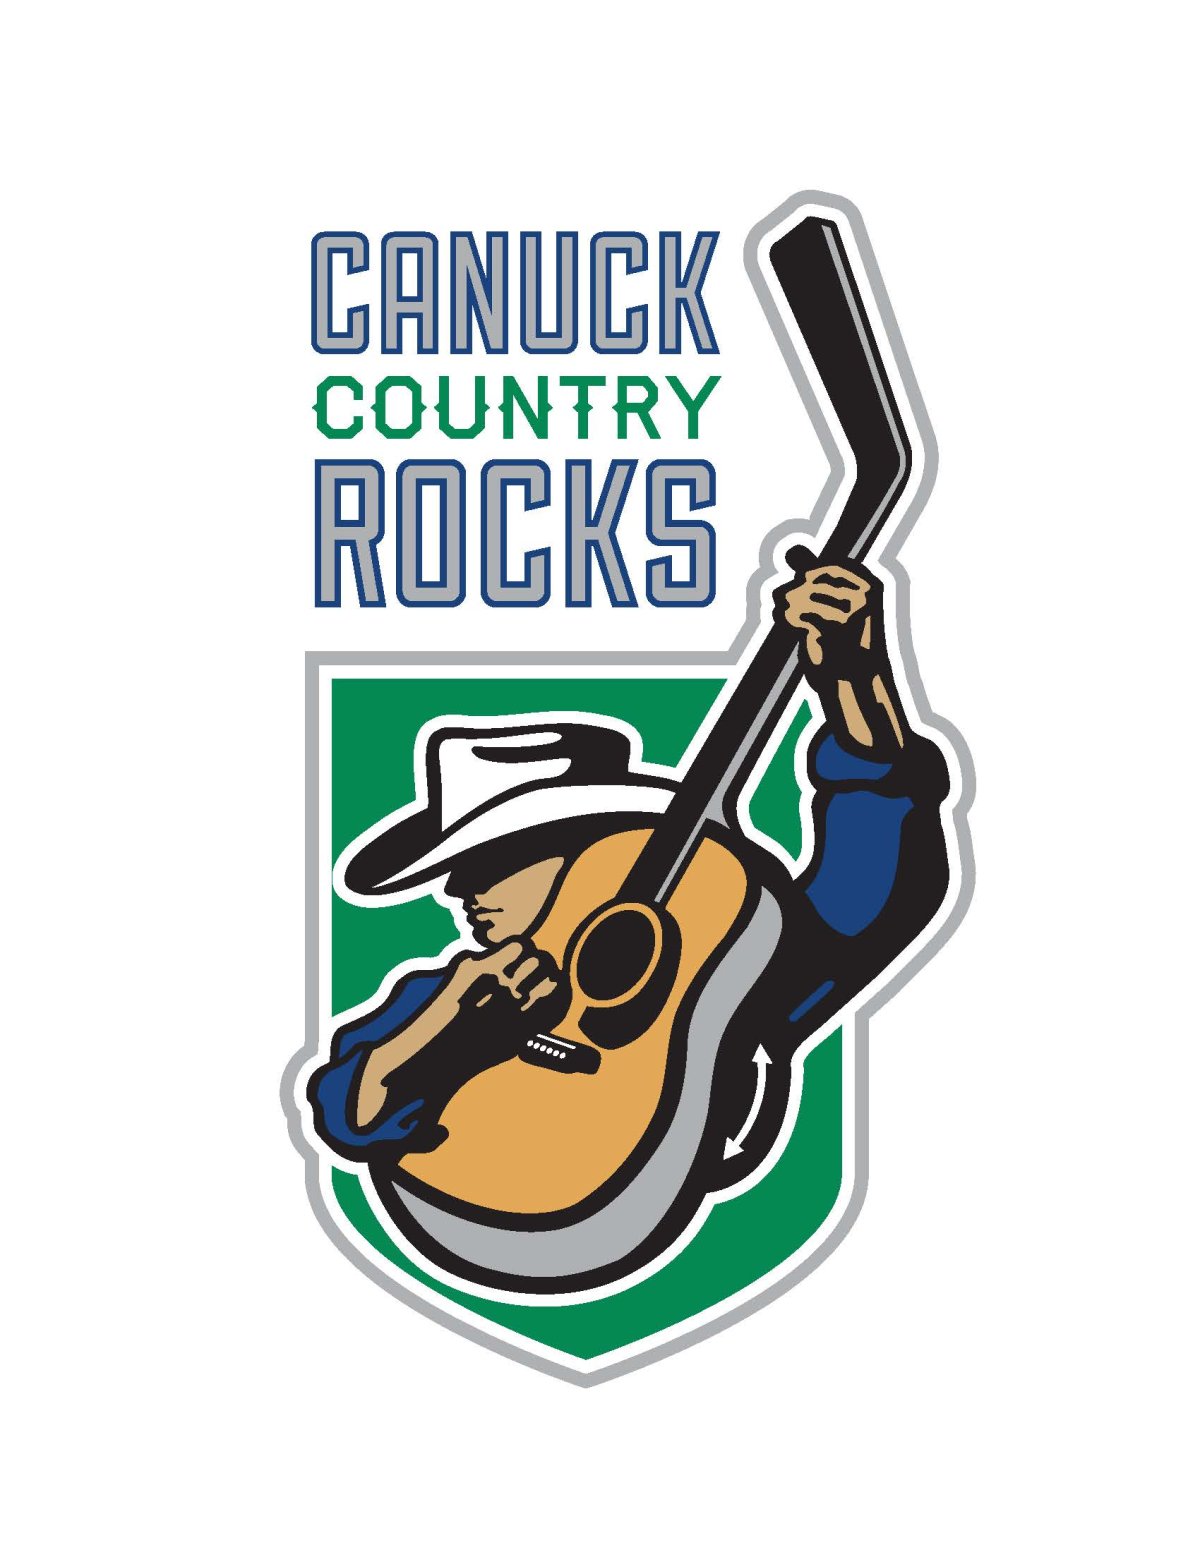 Global BC & 980 CKNW supports Canuck Country Rocks - image